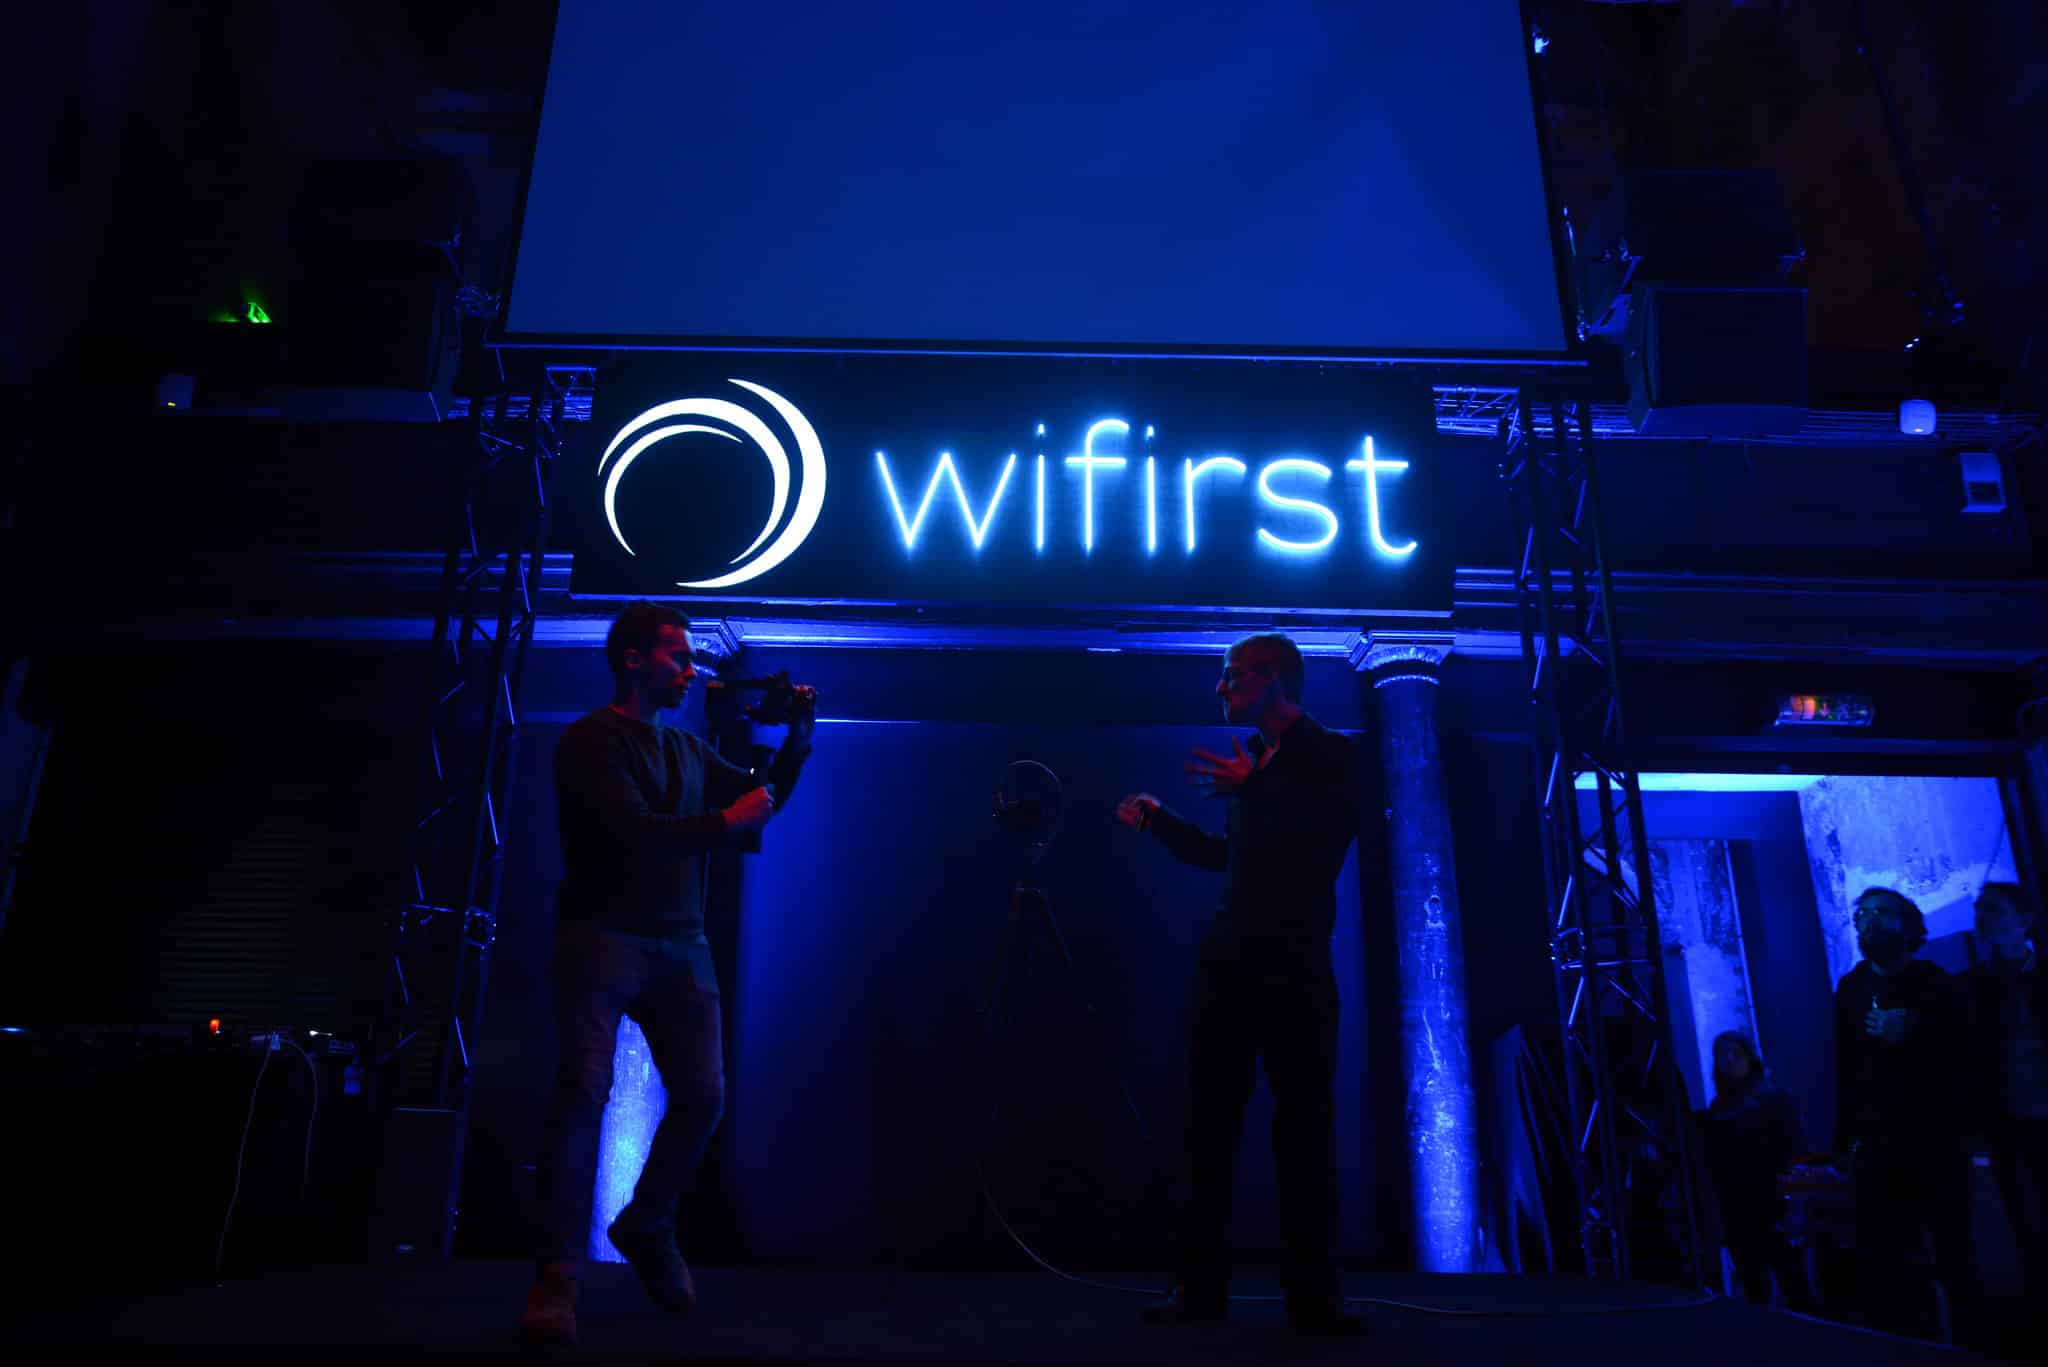 discours speech 15 ans wifirst cafe A paris soiree corporate futuriste evenement sur mesure bollore odysee connectee wifirst agence wato we are the oracle evenementiel event